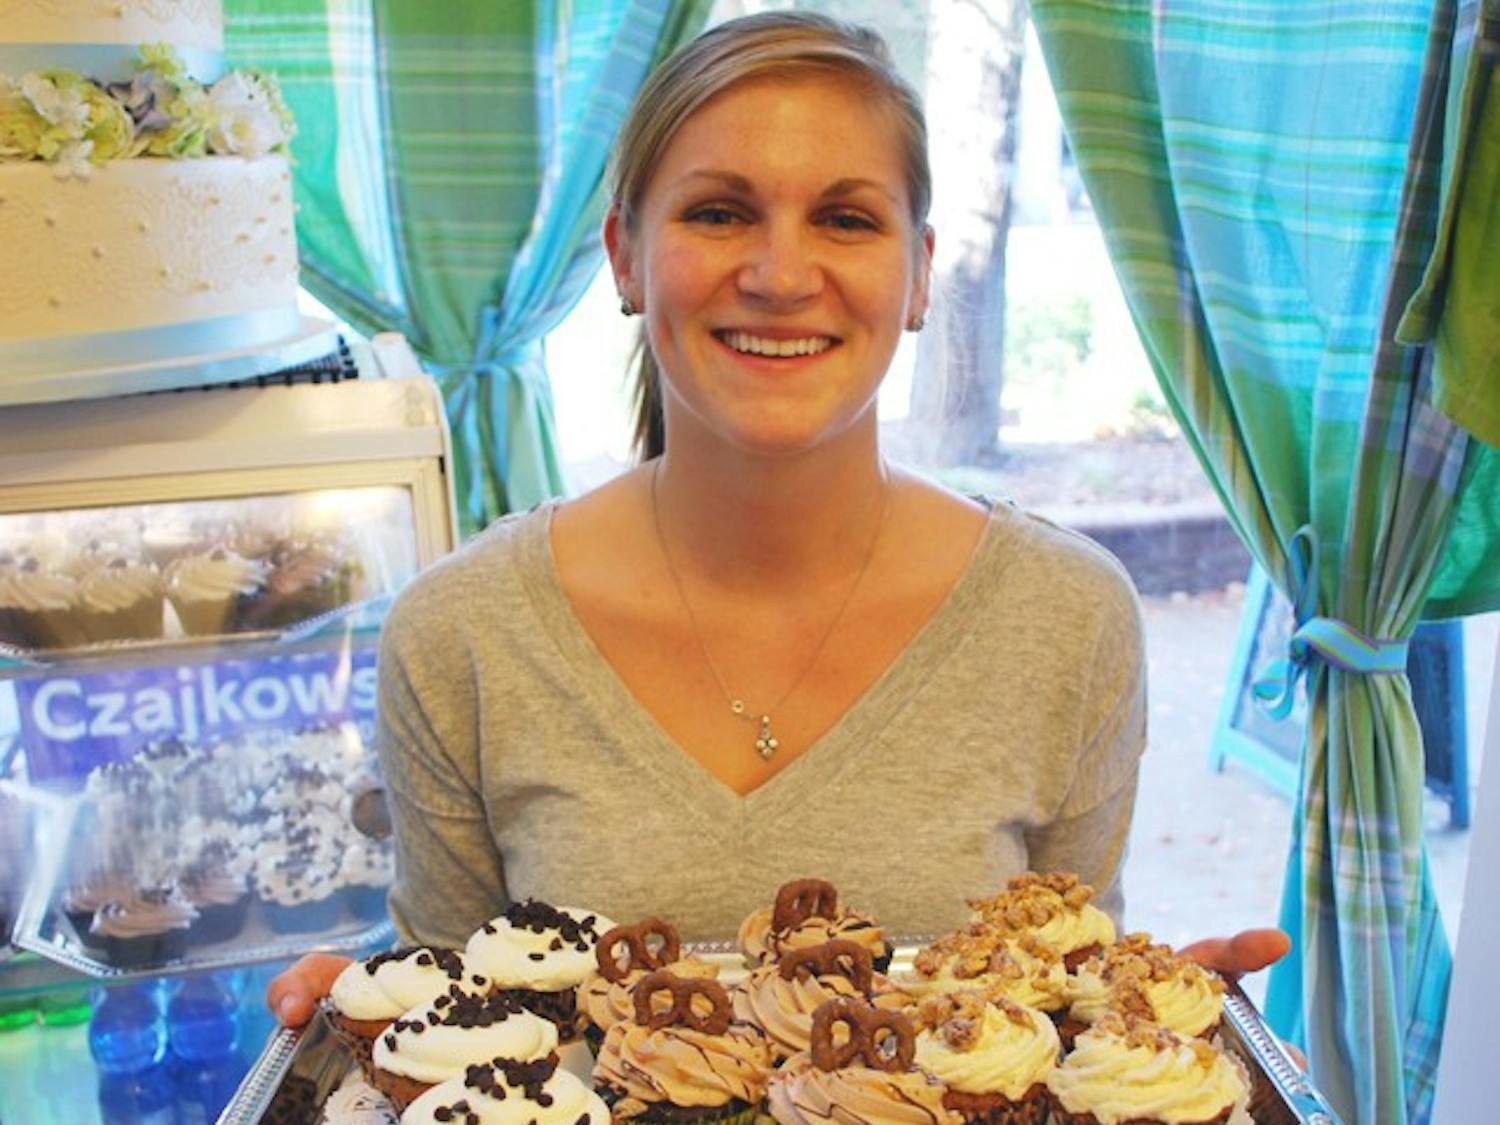 Local cupcake store Sugarland displays some of their fall cupcakesUNC exercise science student and Sugarland employee, Carley Brown displays some fall cupcakes (from left to right): Pumpkin Chocolate Chip, Oktoberfest, and Sweet Potato Praline